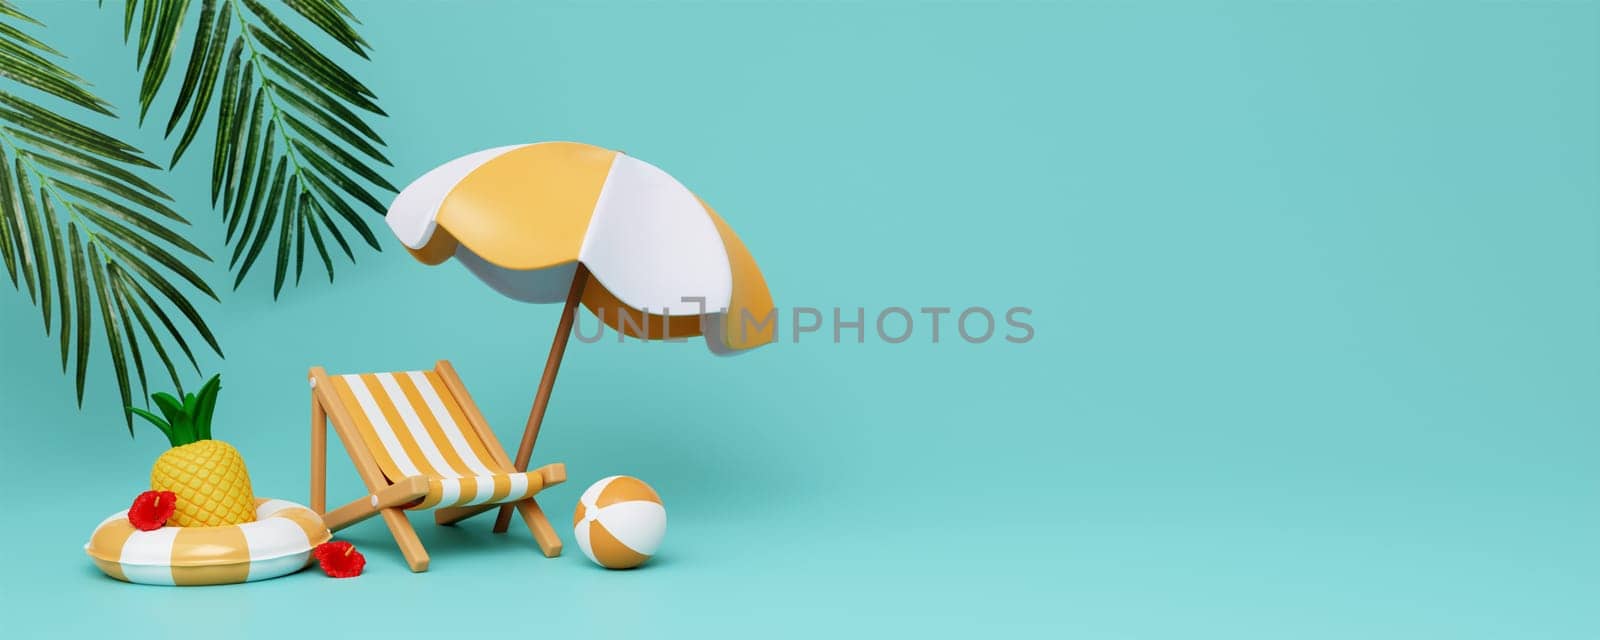 Beach Chair, Umbrella and swimming ring , Summer holiday, Time to travel concept. Creative travel concept idea with copy space. illustration banner 3d rendering illustration by meepiangraphic